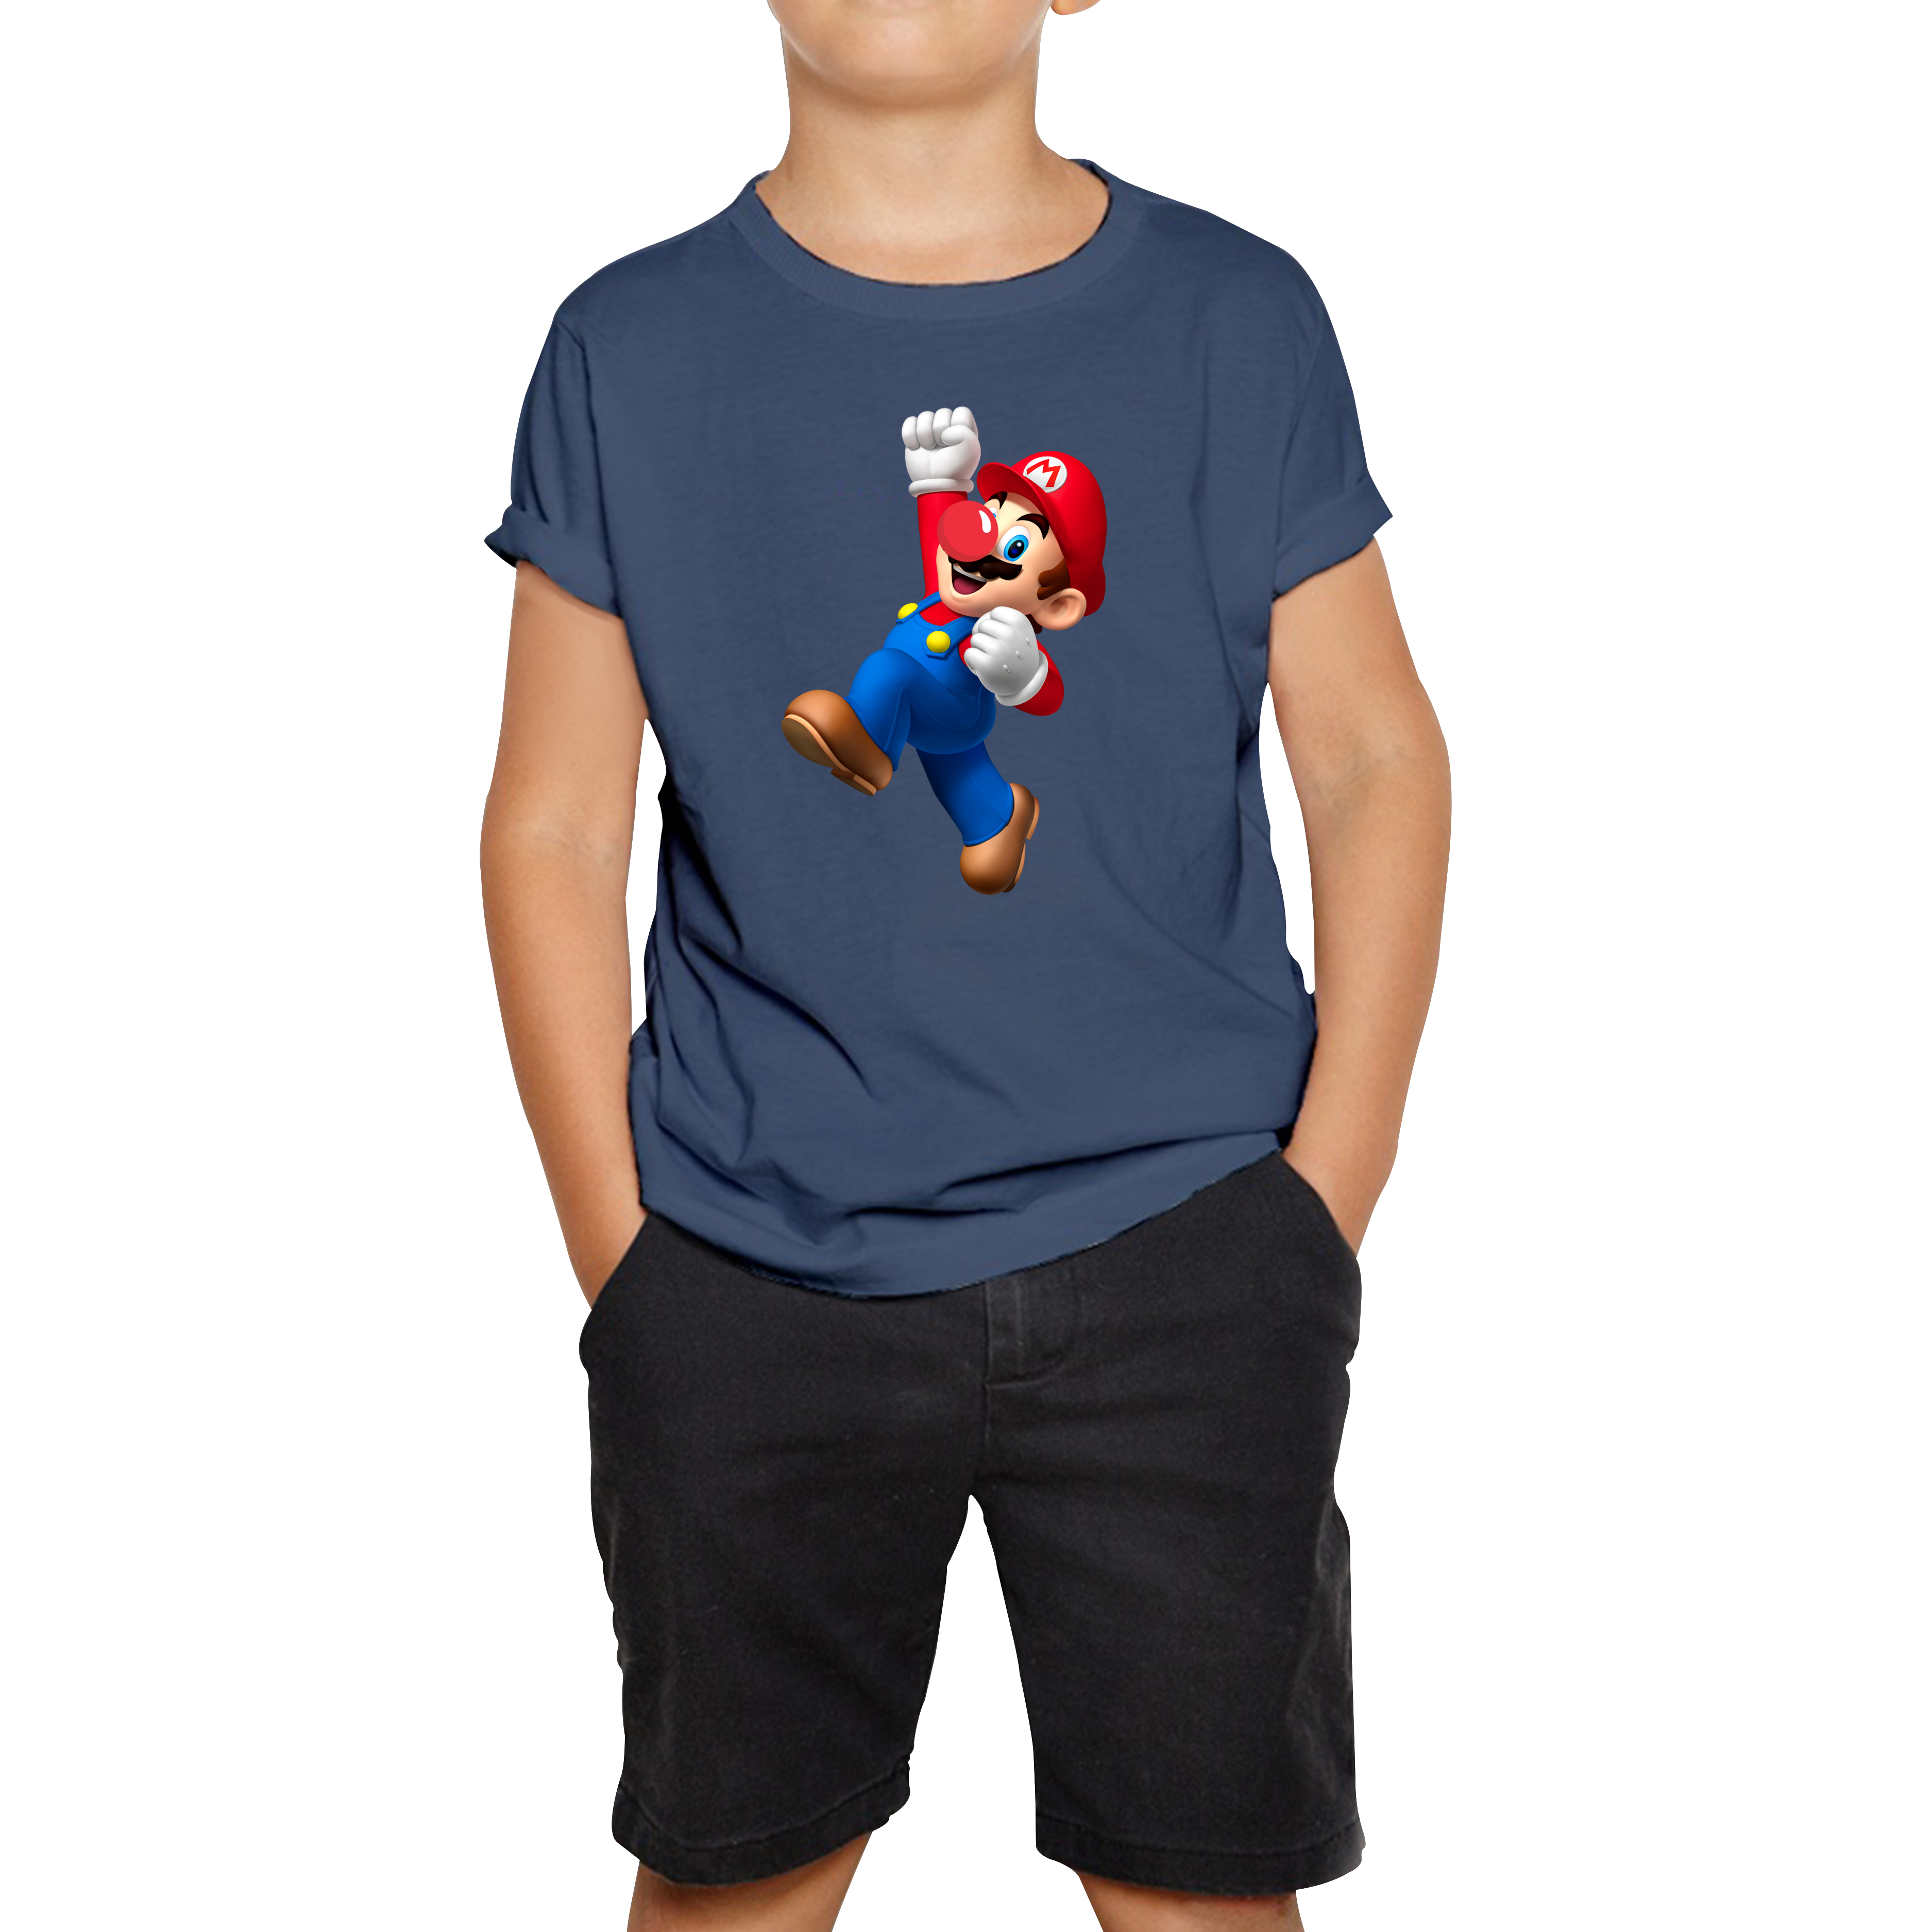 Super Mario Bros Red Nose Day Kids T Shirt. 50% Goes To Charity